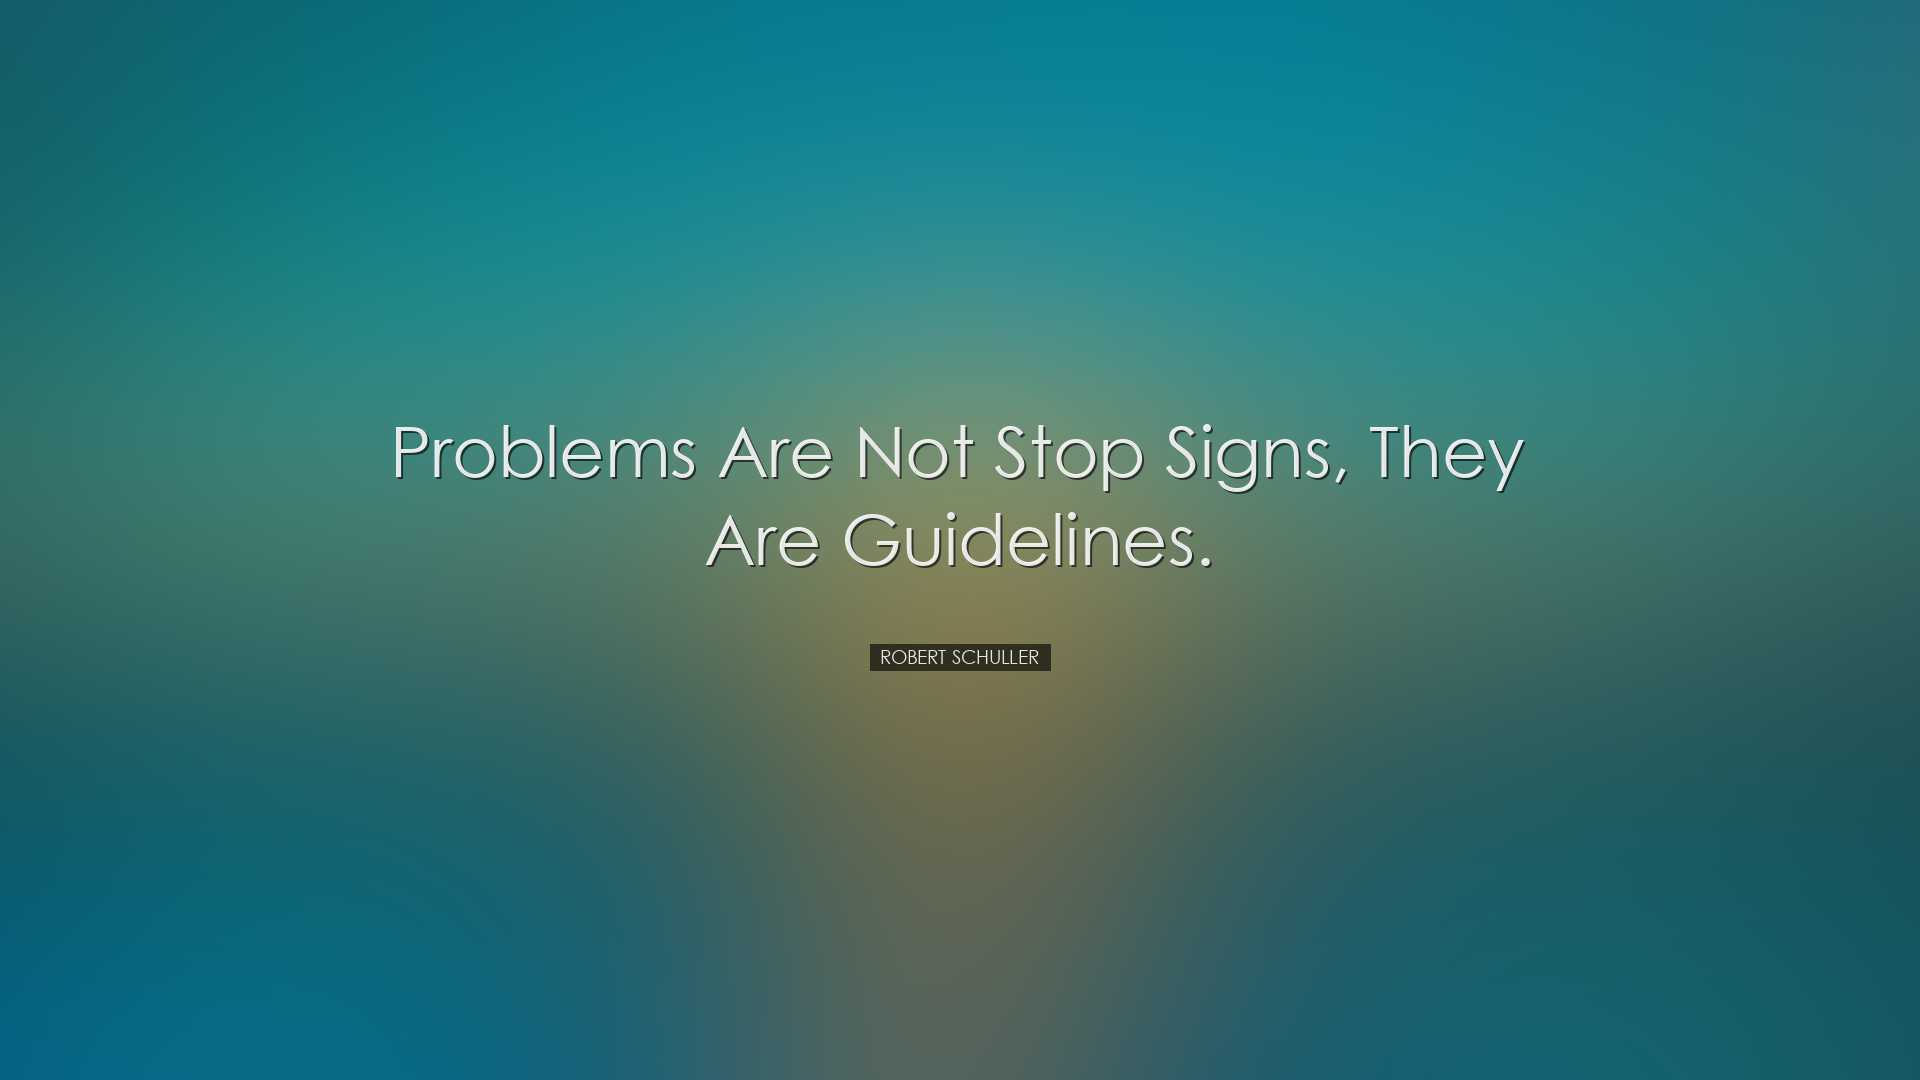 Problems are not stop signs, they are guidelines. - Robert Schulle